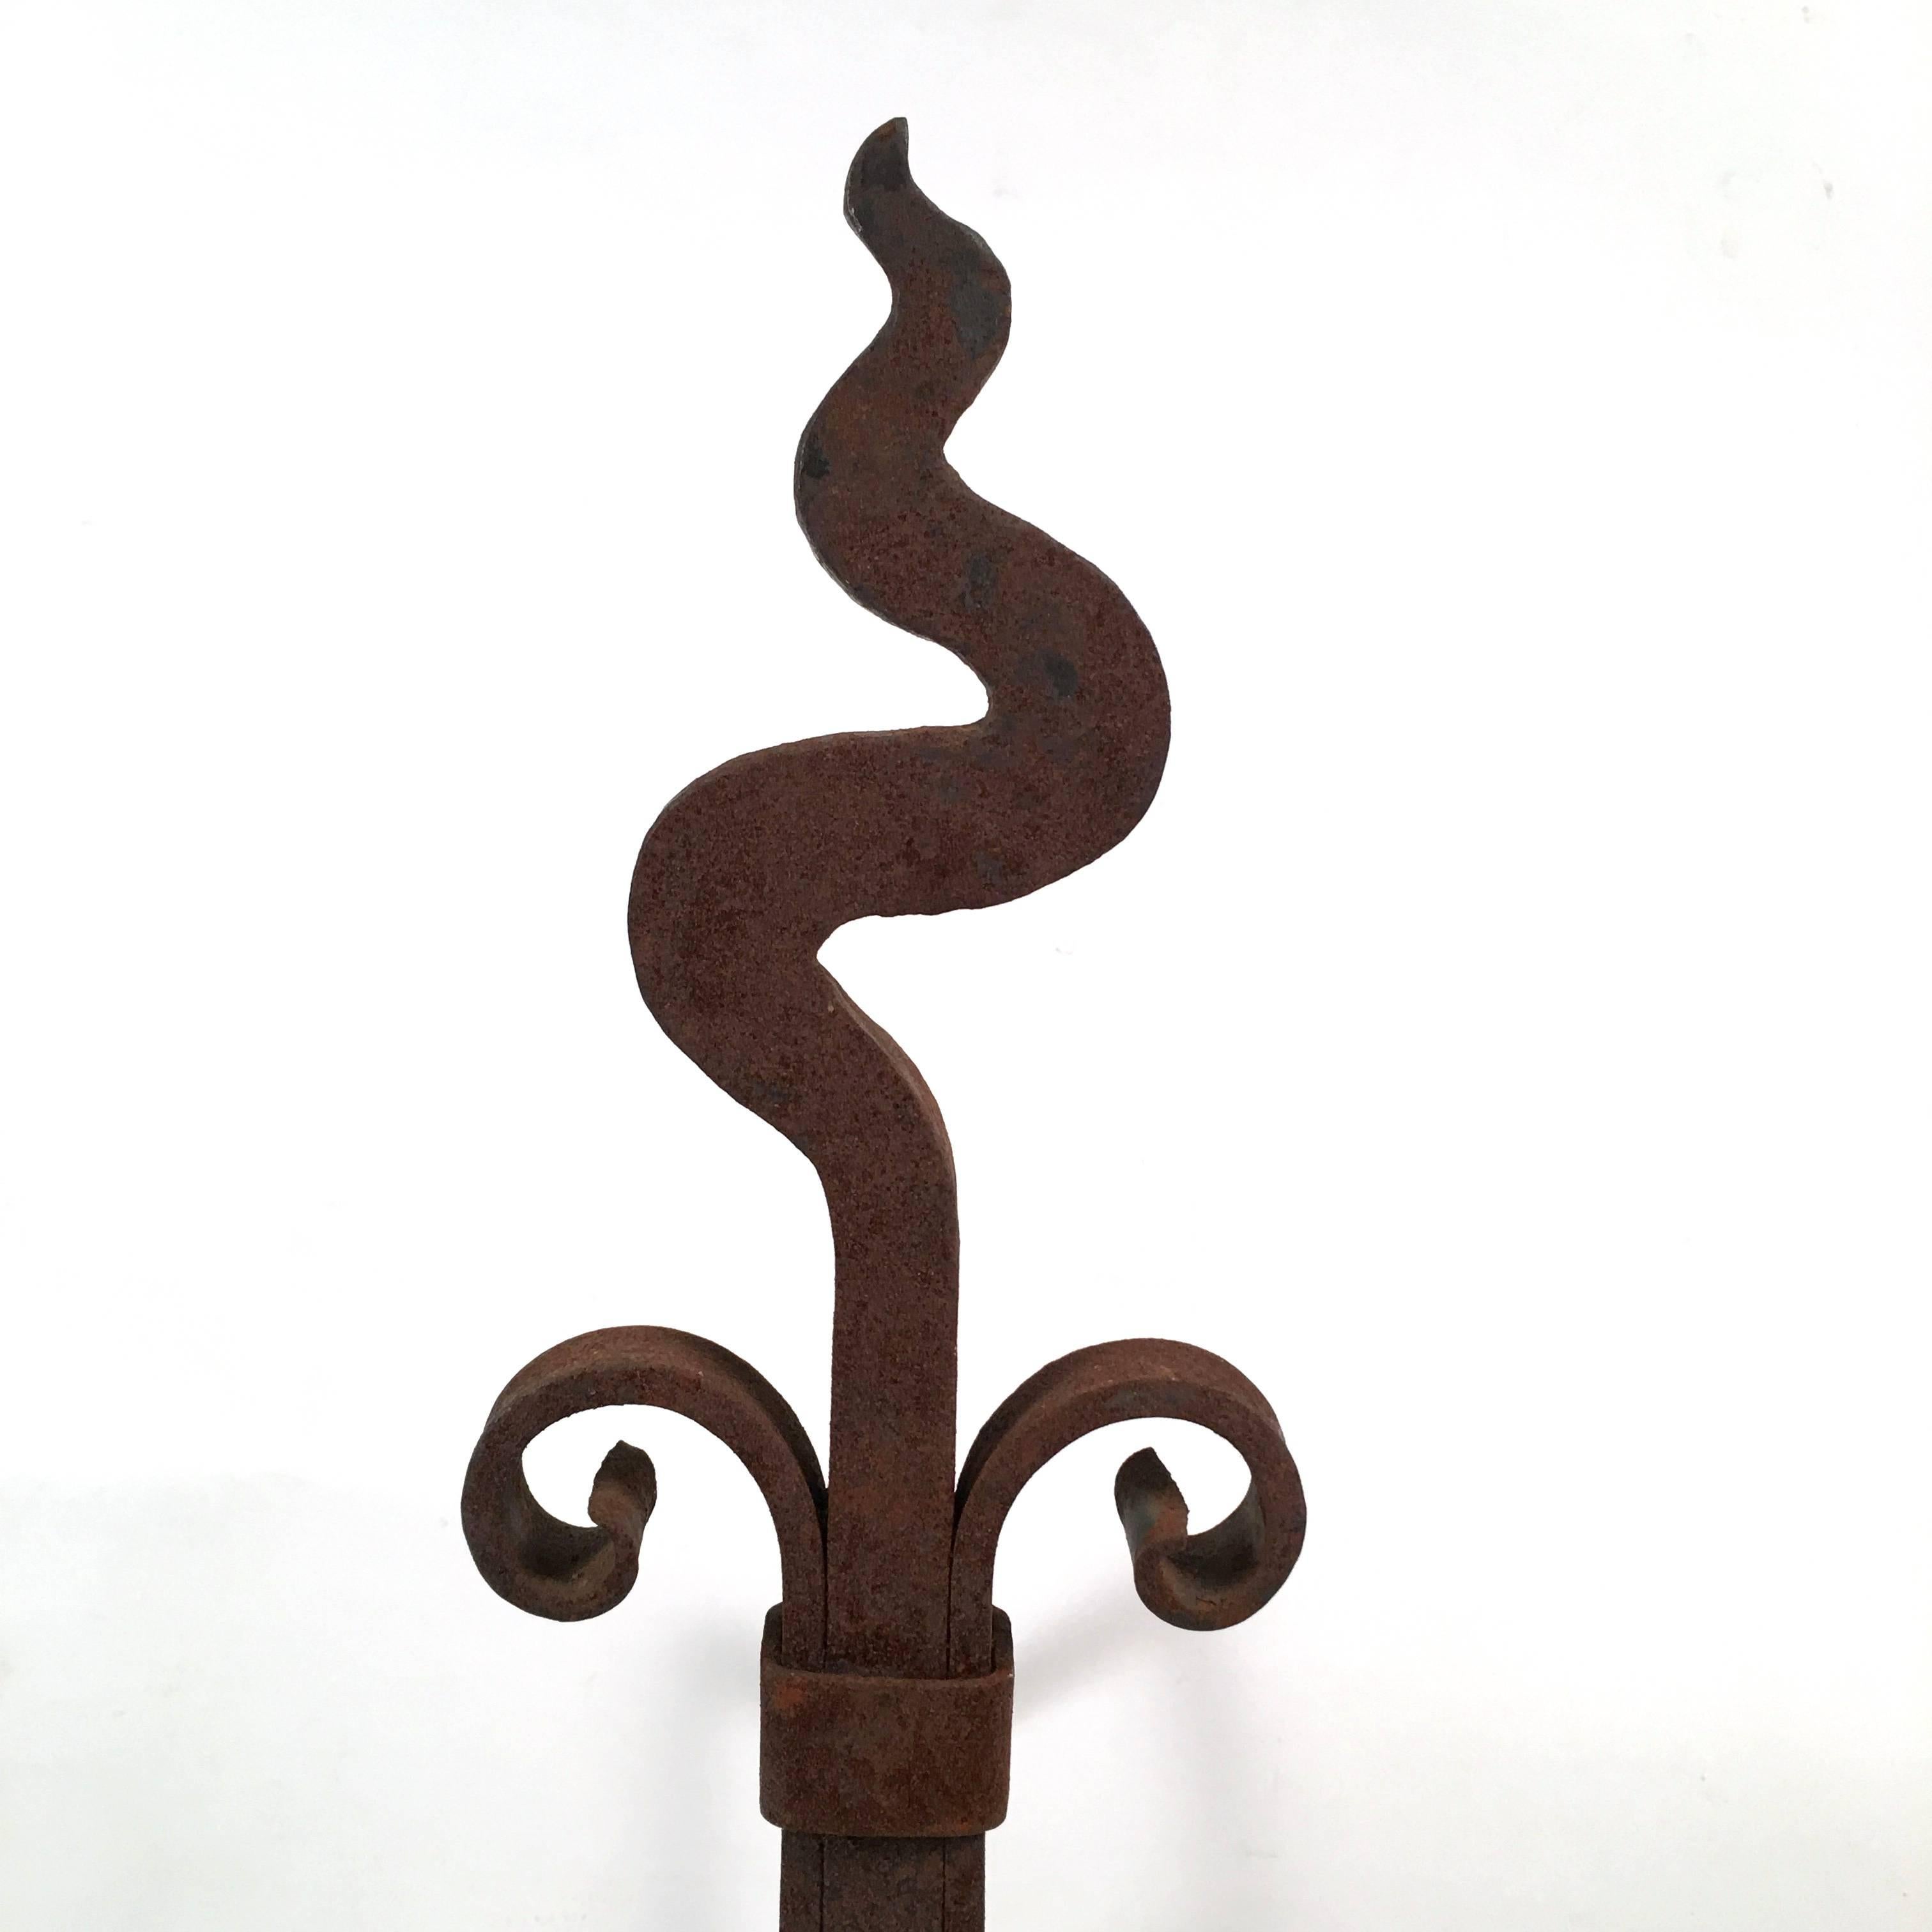 A graphic pair of Pair of Arts and Crafts period wrought iron andirons with wonderful lines, each one with a squiggly, serpentine top over a square section support, the top of which is wrapped with a band from which two scrolled elements issue, all